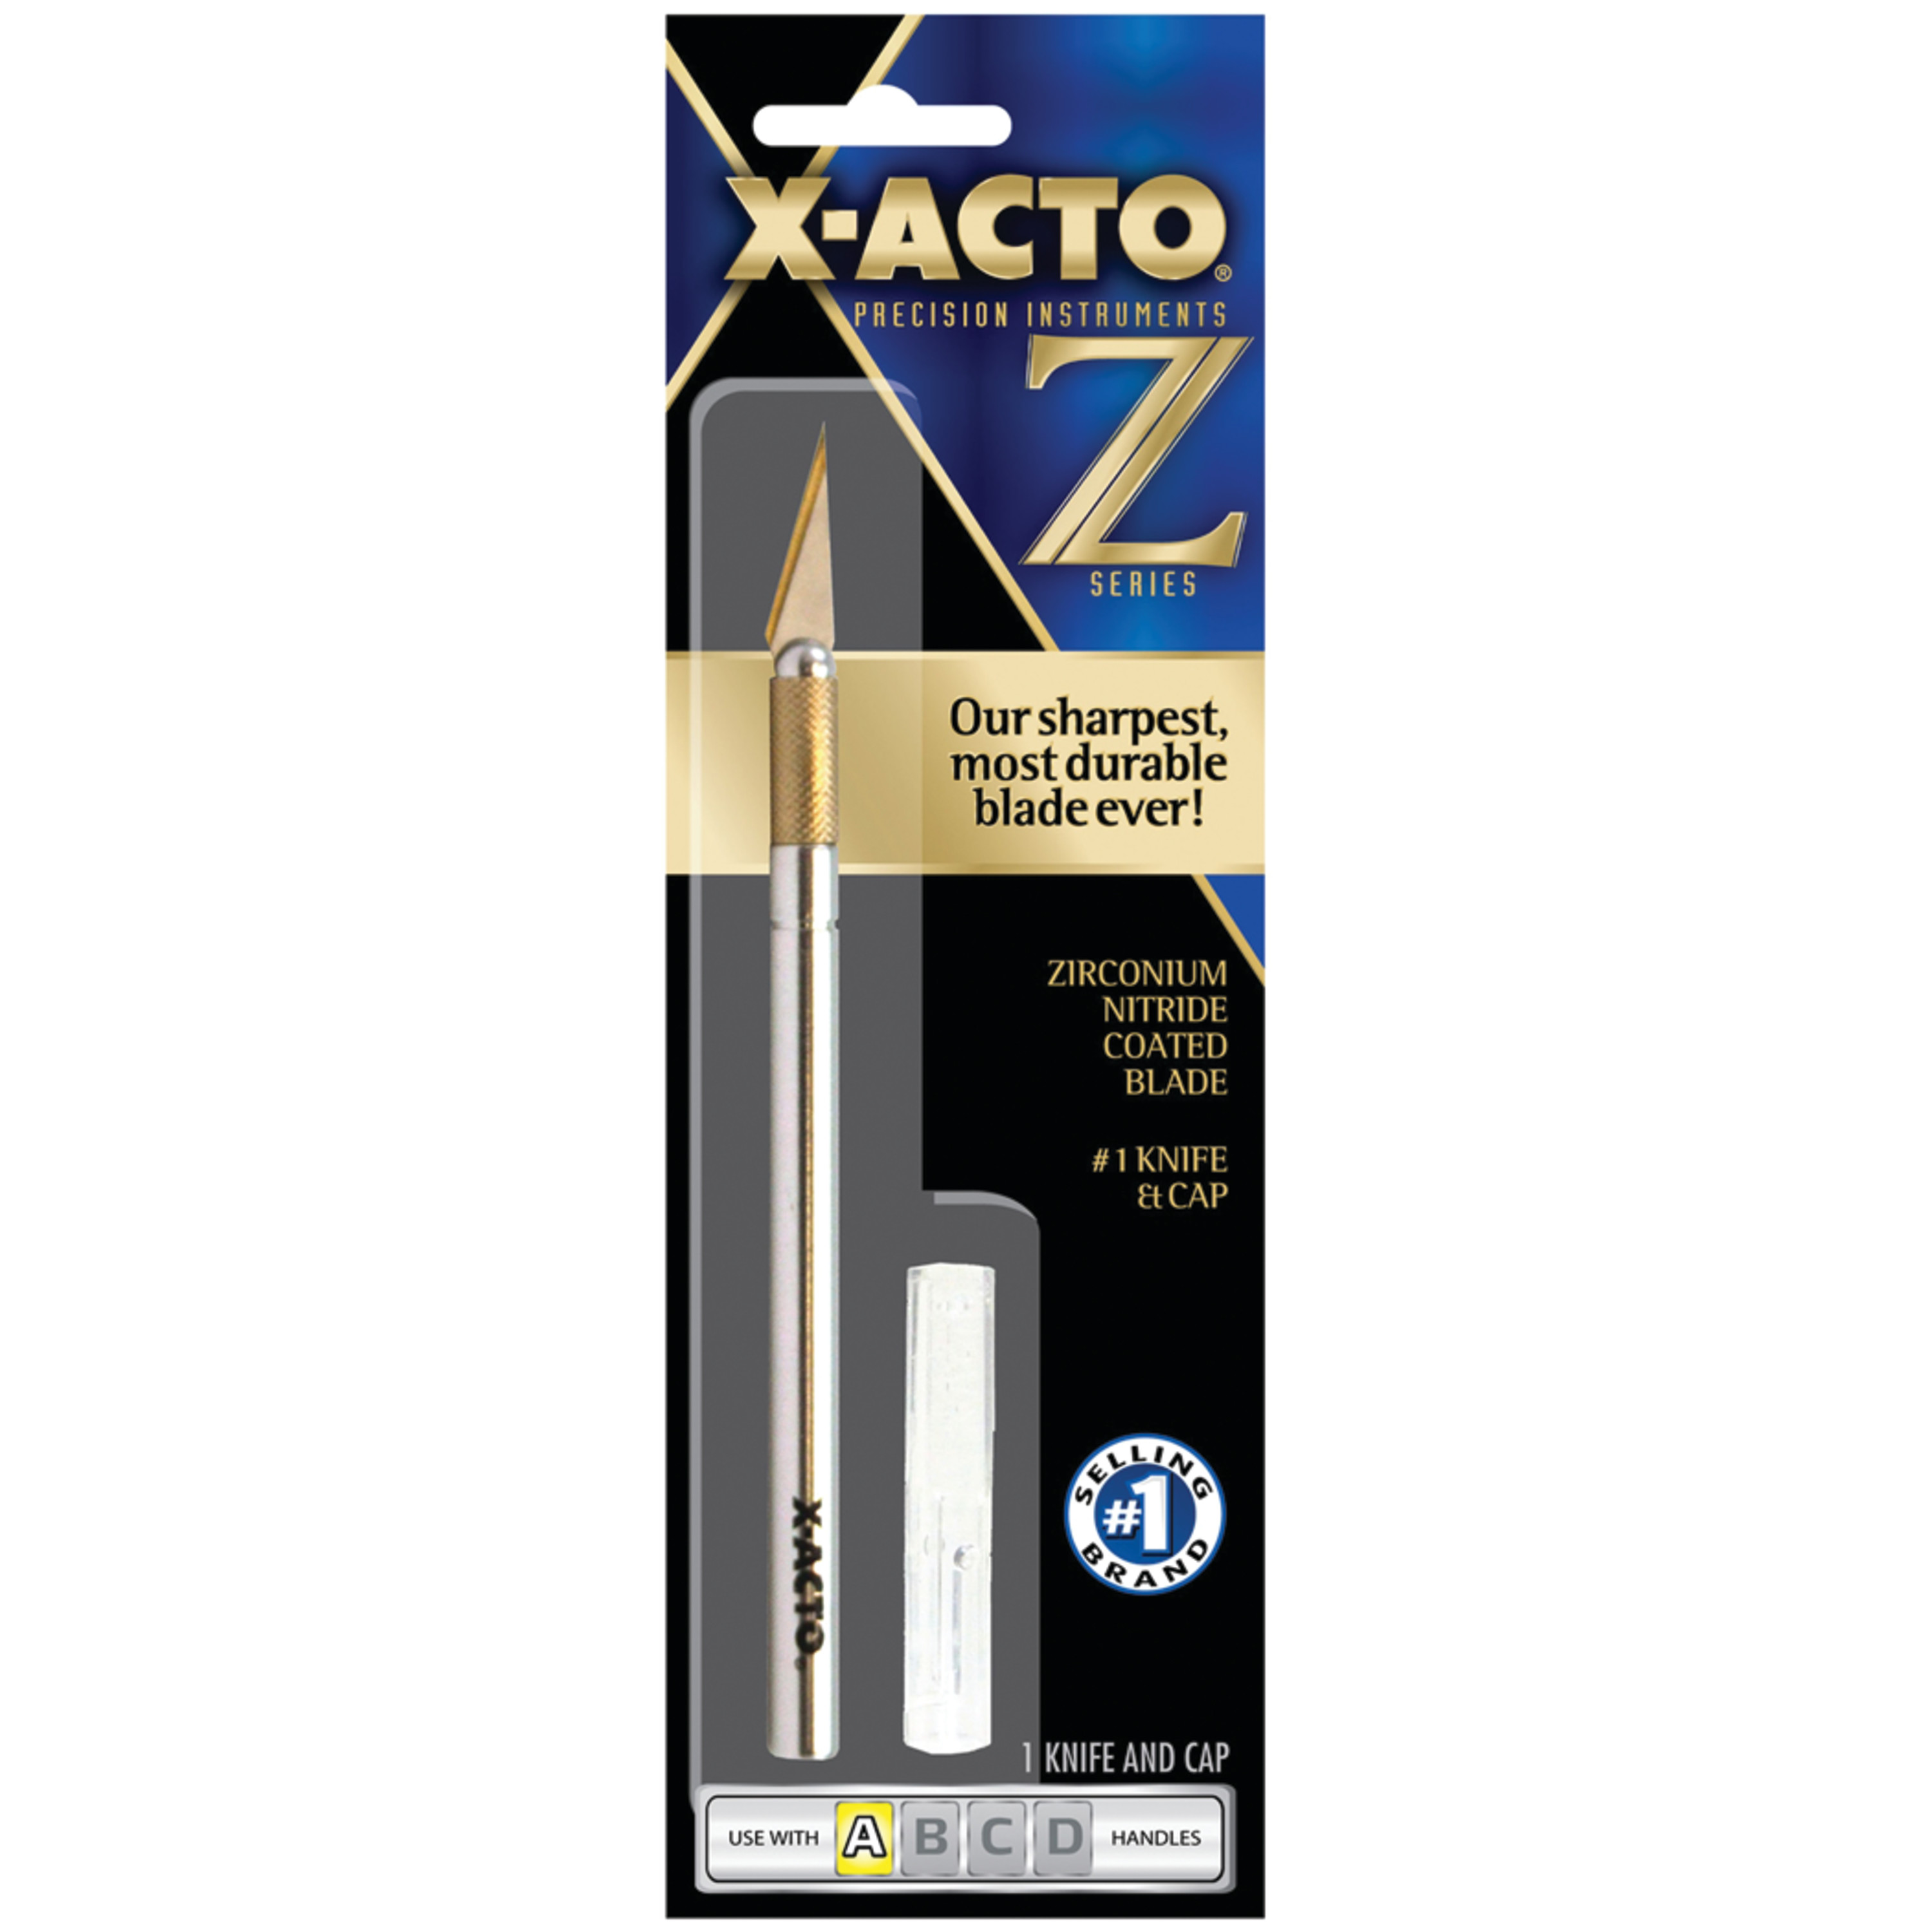 X-ACTO Z Series Light-Weight Precision Knife, No 11, 4-7/8 in L, Stainless Steel Blade, Aluminum Handle, Silver, Gold Hue - image 1 of 5